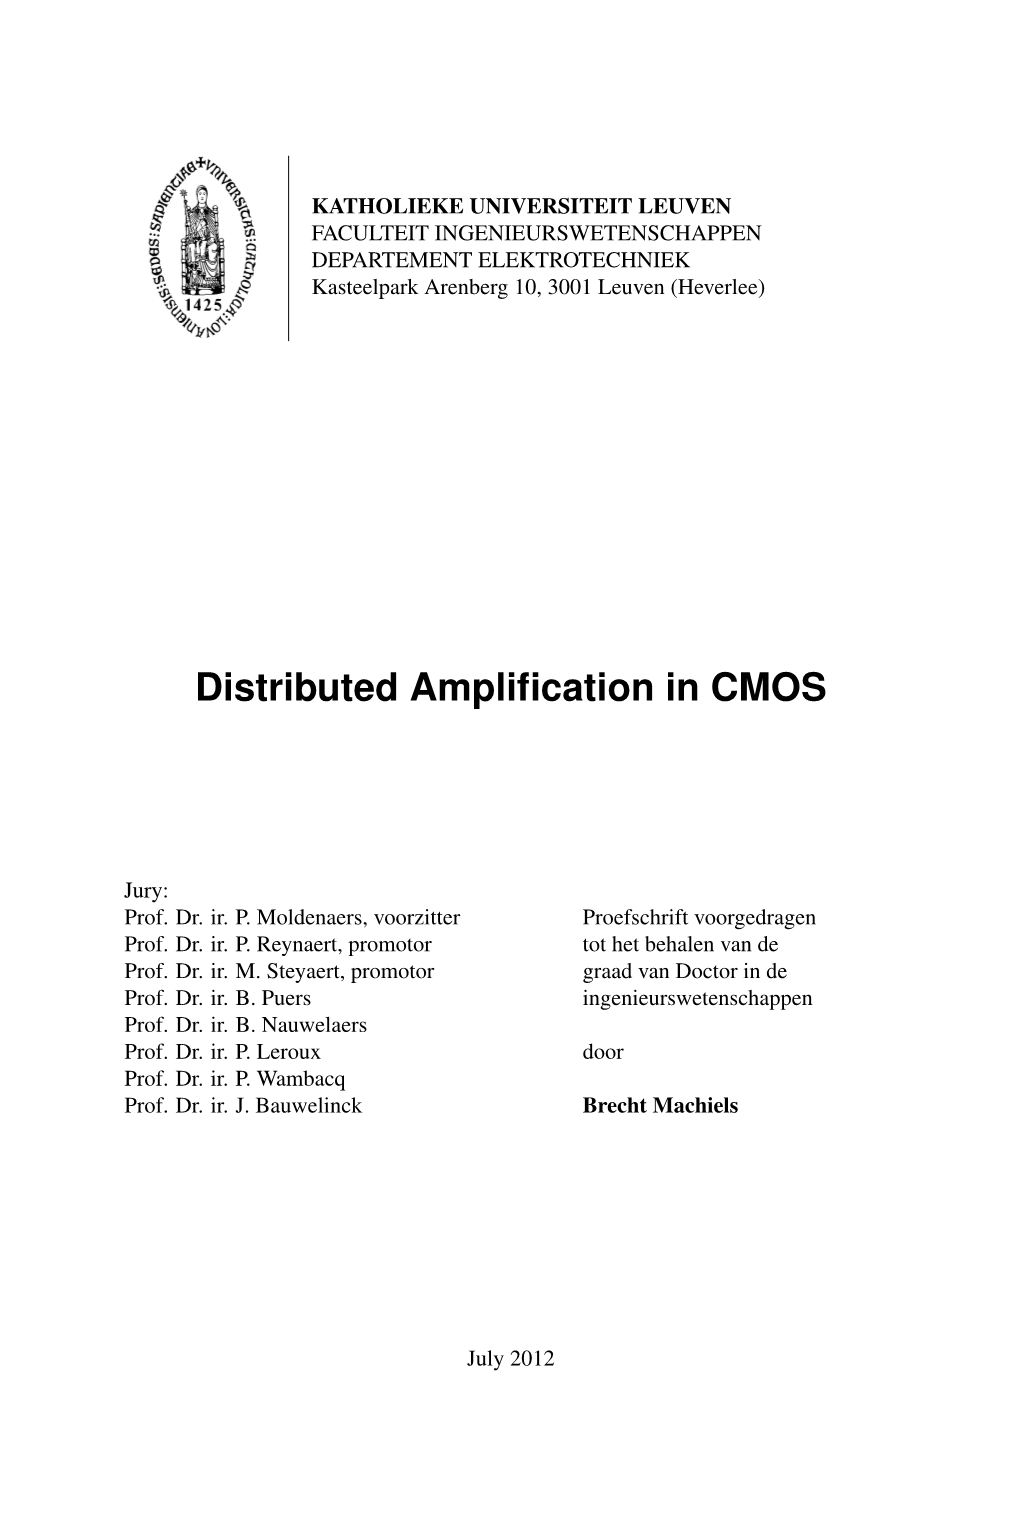 Distributed Amplification in CMOS